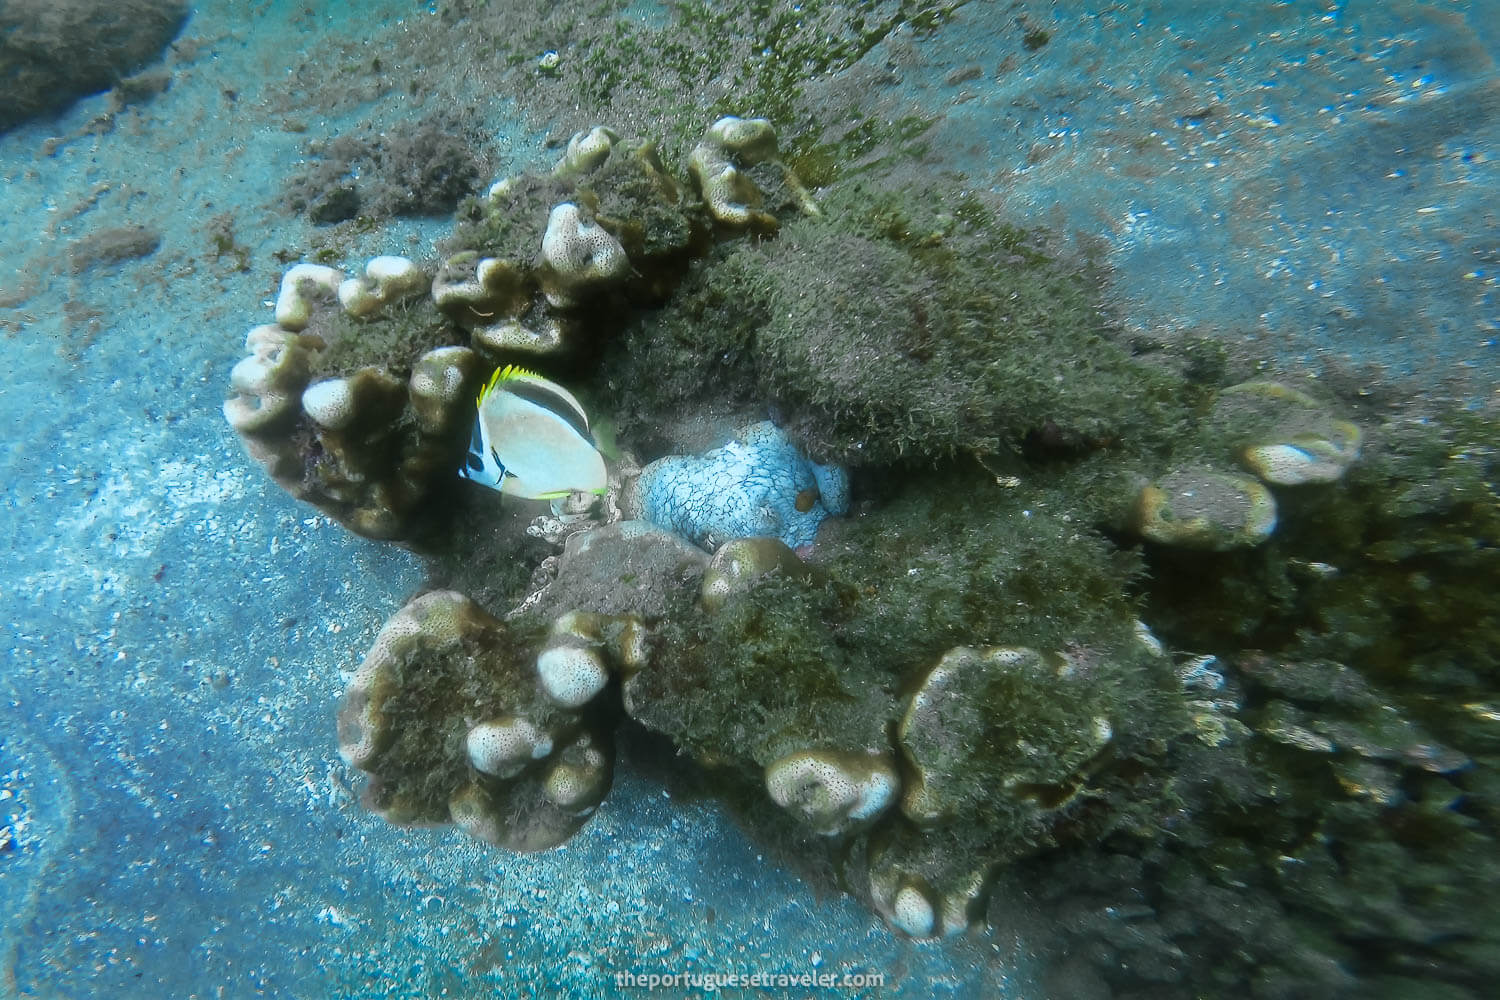 An Octopus trying to camouflage itself at El Acuario